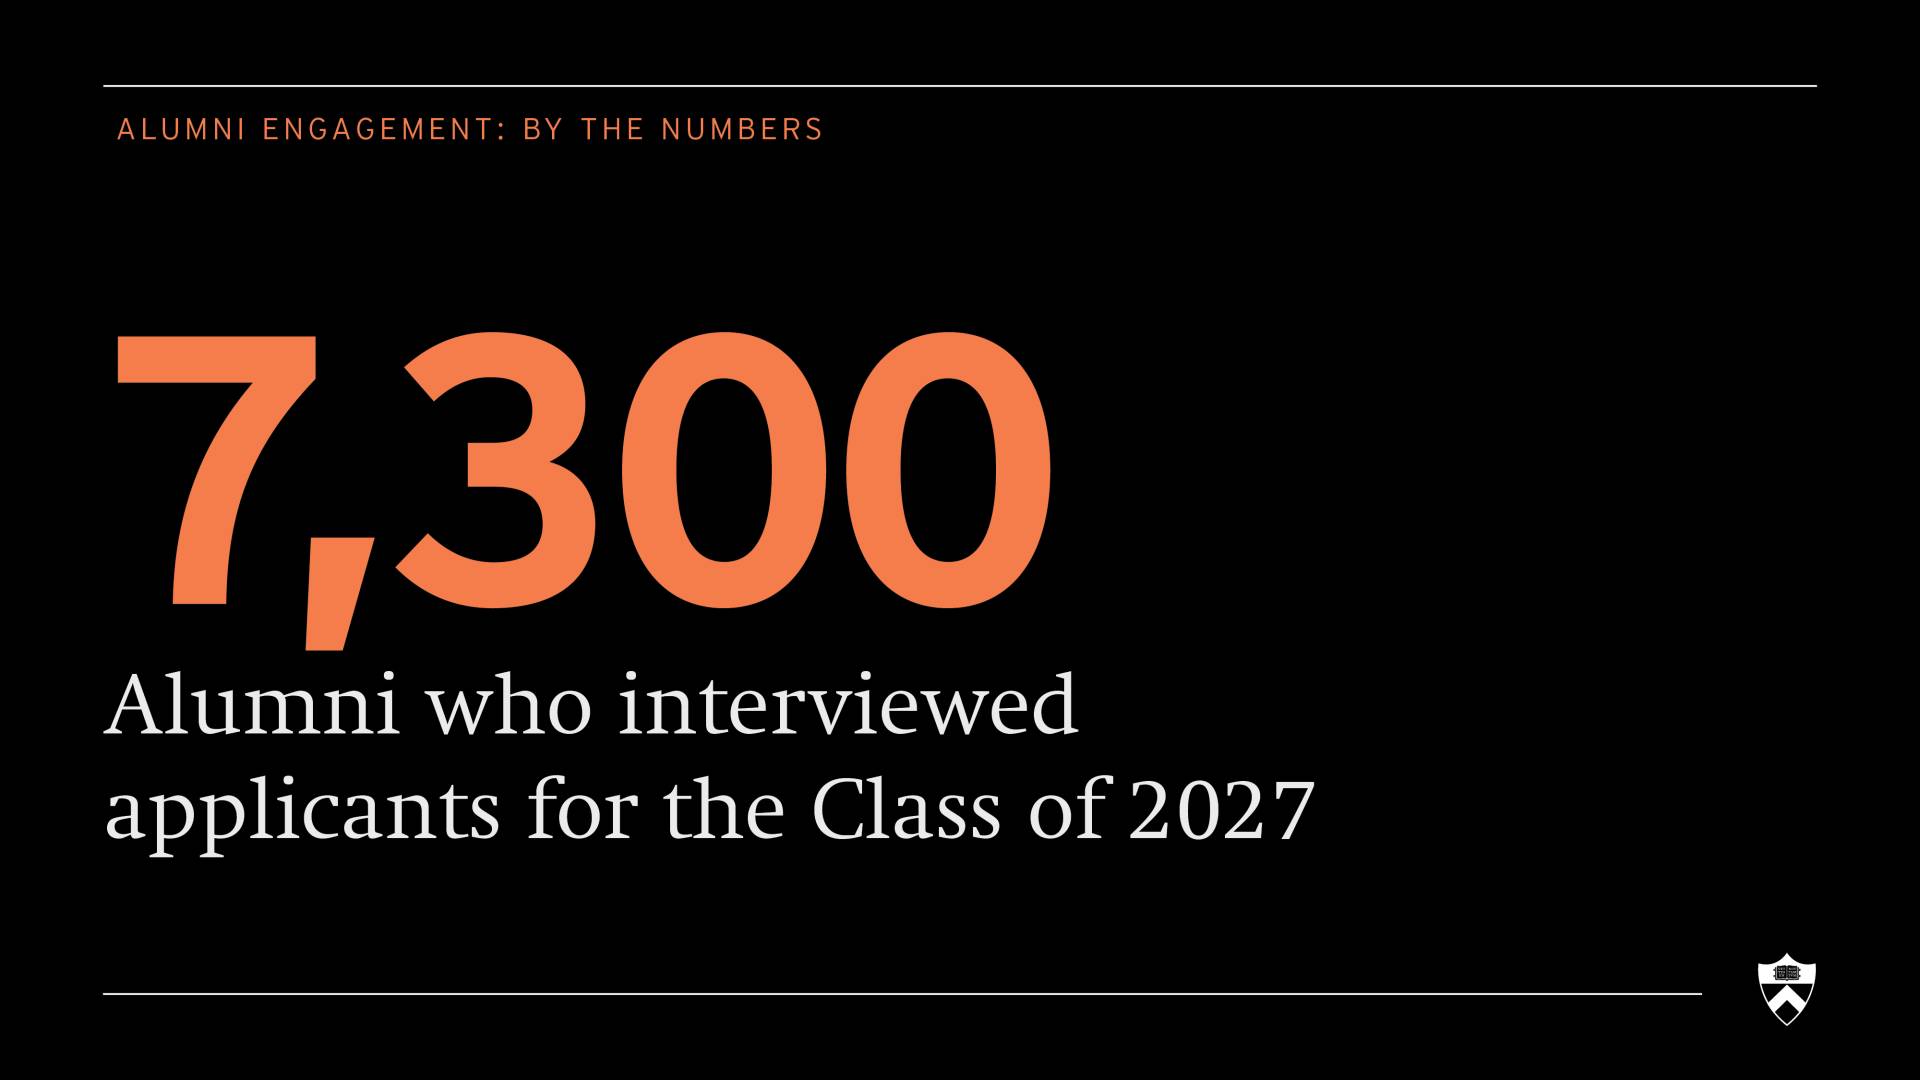 Alumni who interviewed applicants for the Class of 2027: 7,300